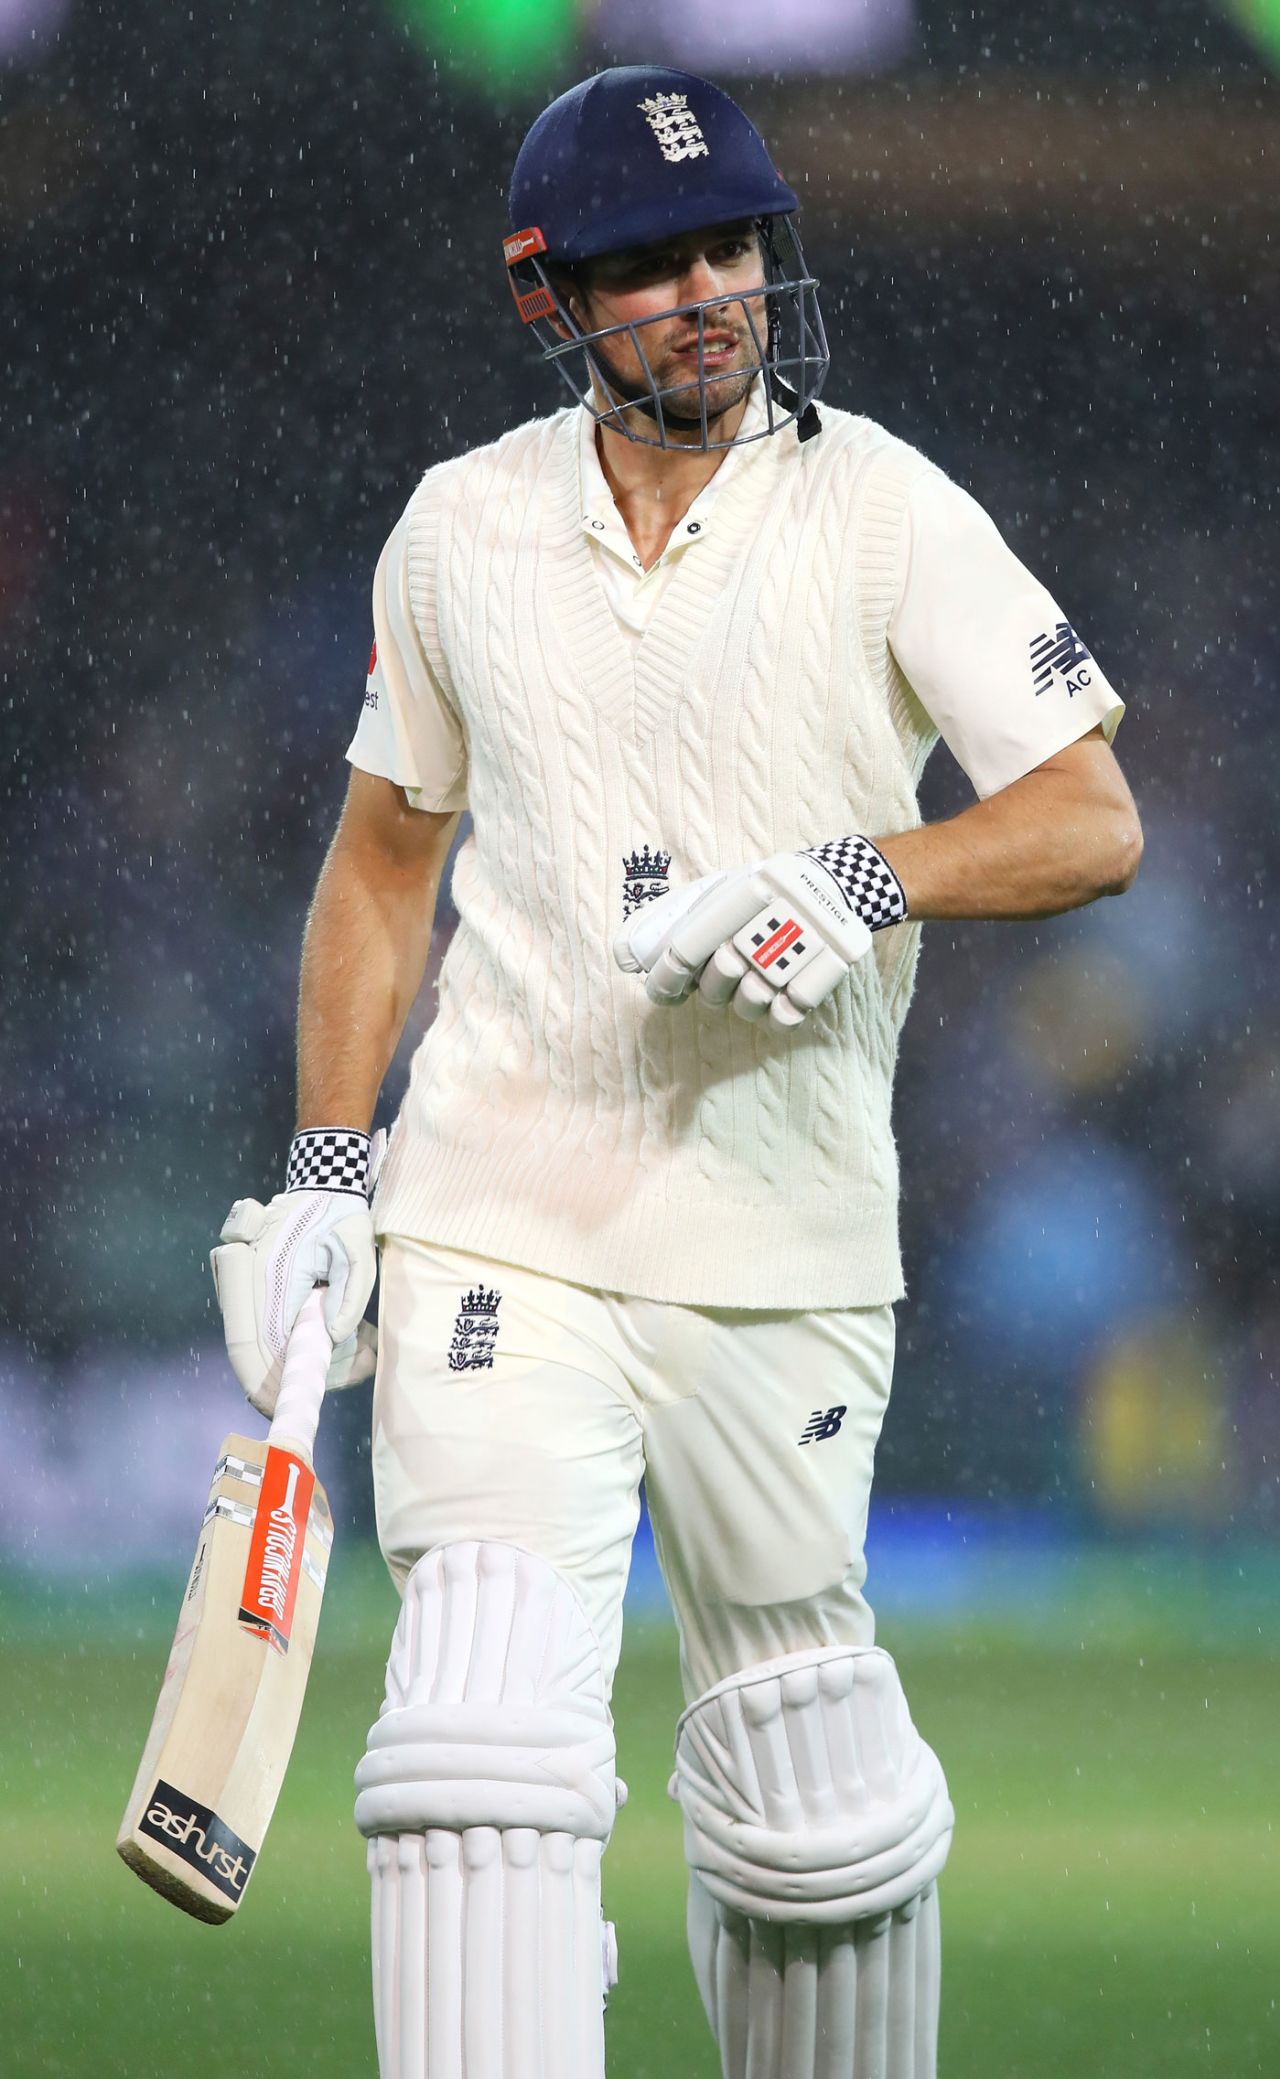 Alastair Cook heads off as the rain falls, Australia v England, 2nd Test, The Ashes 2017-18, 2nd day, Adelaide, December 3, 2017